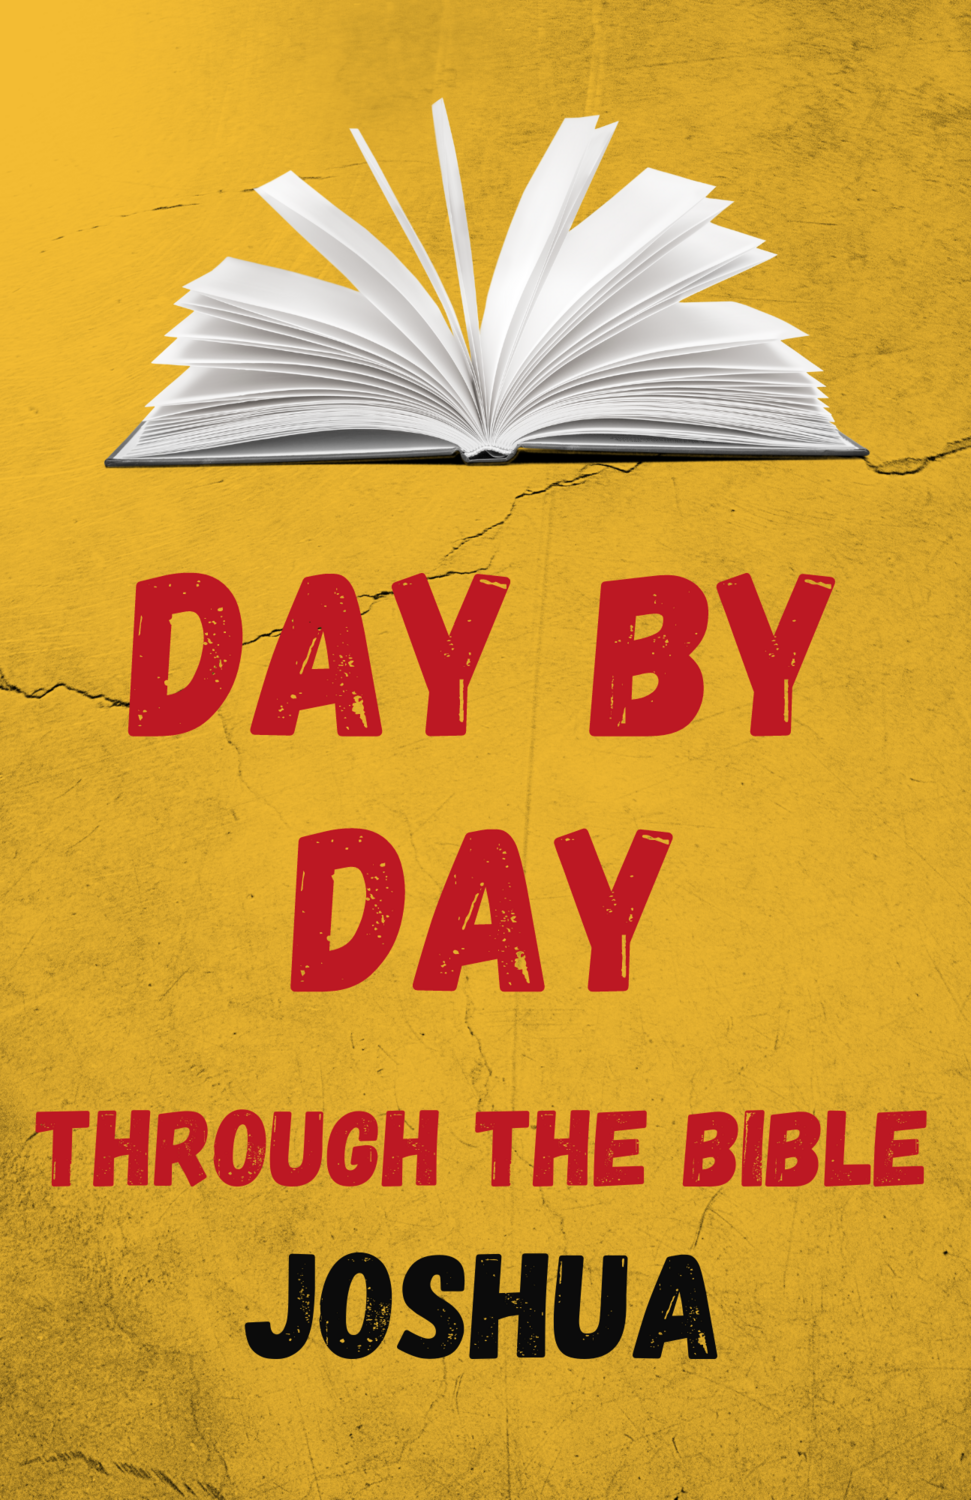 Day By Day Through The Bible - Twenty-Four Days in Joshua - Digital Download